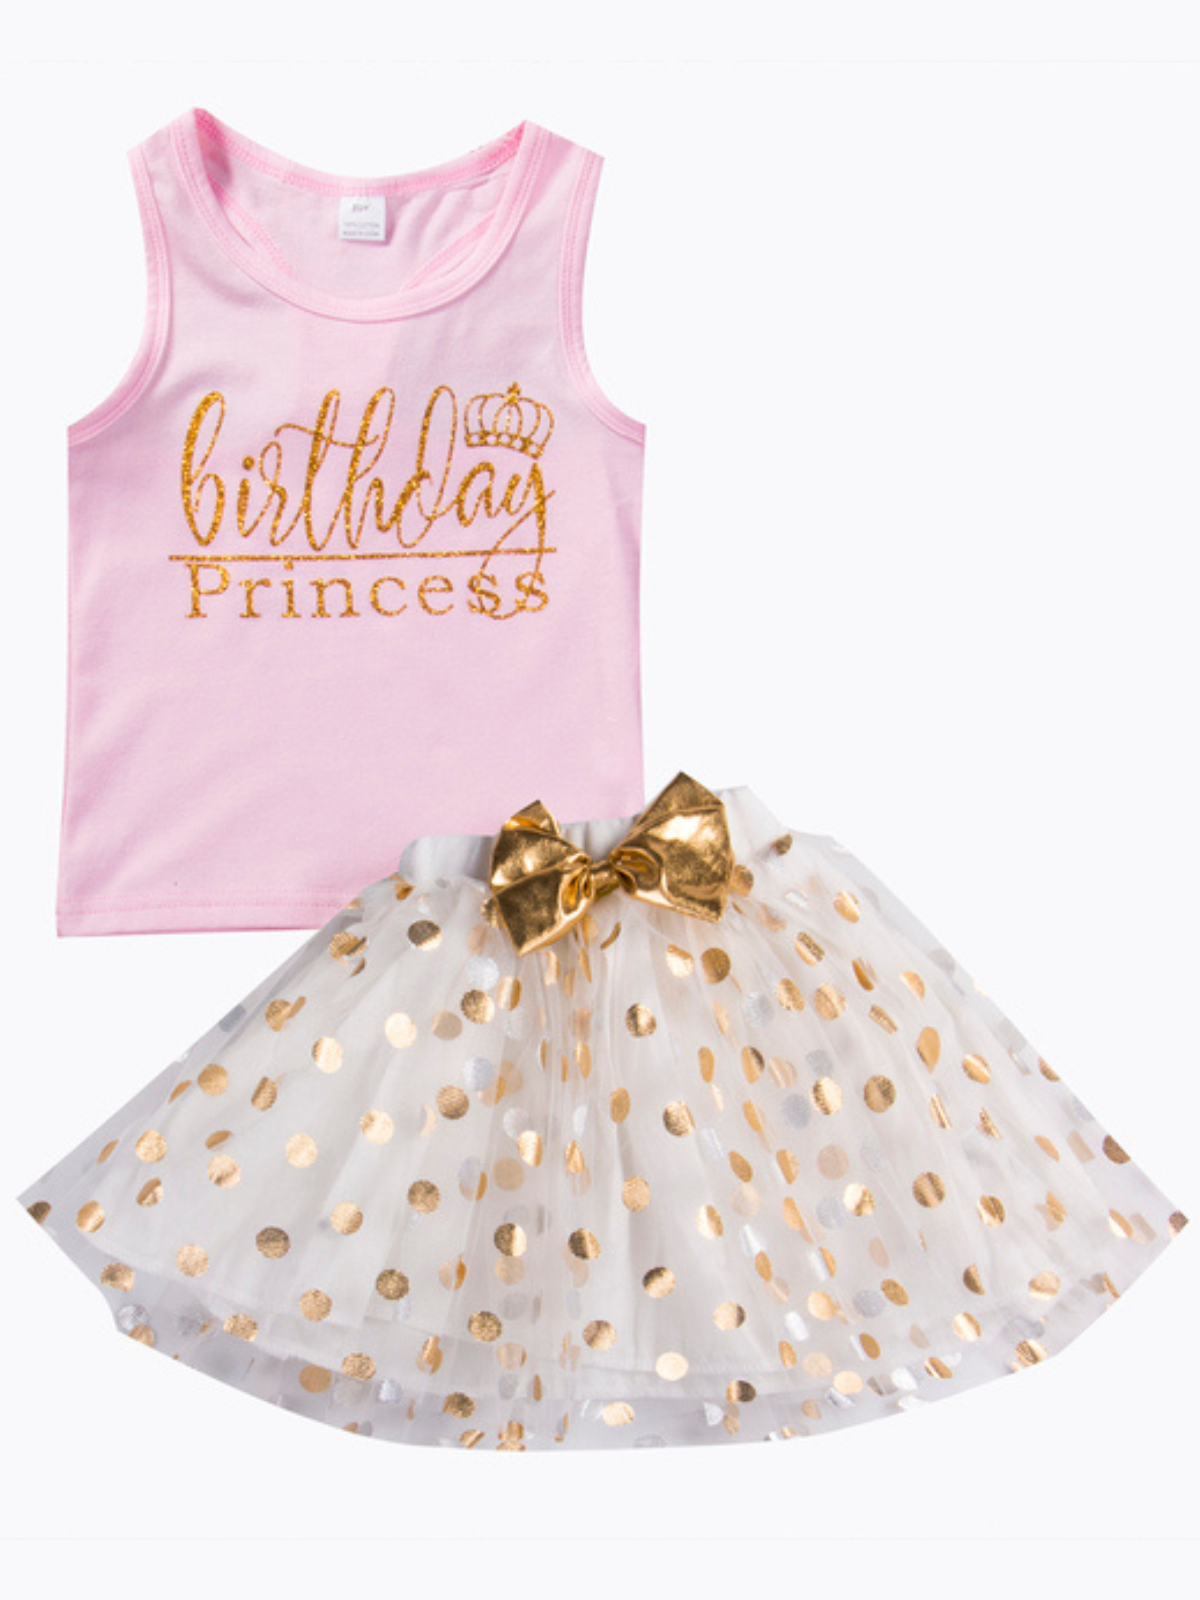 All About Me Birthday Princess Top and Tutu Set